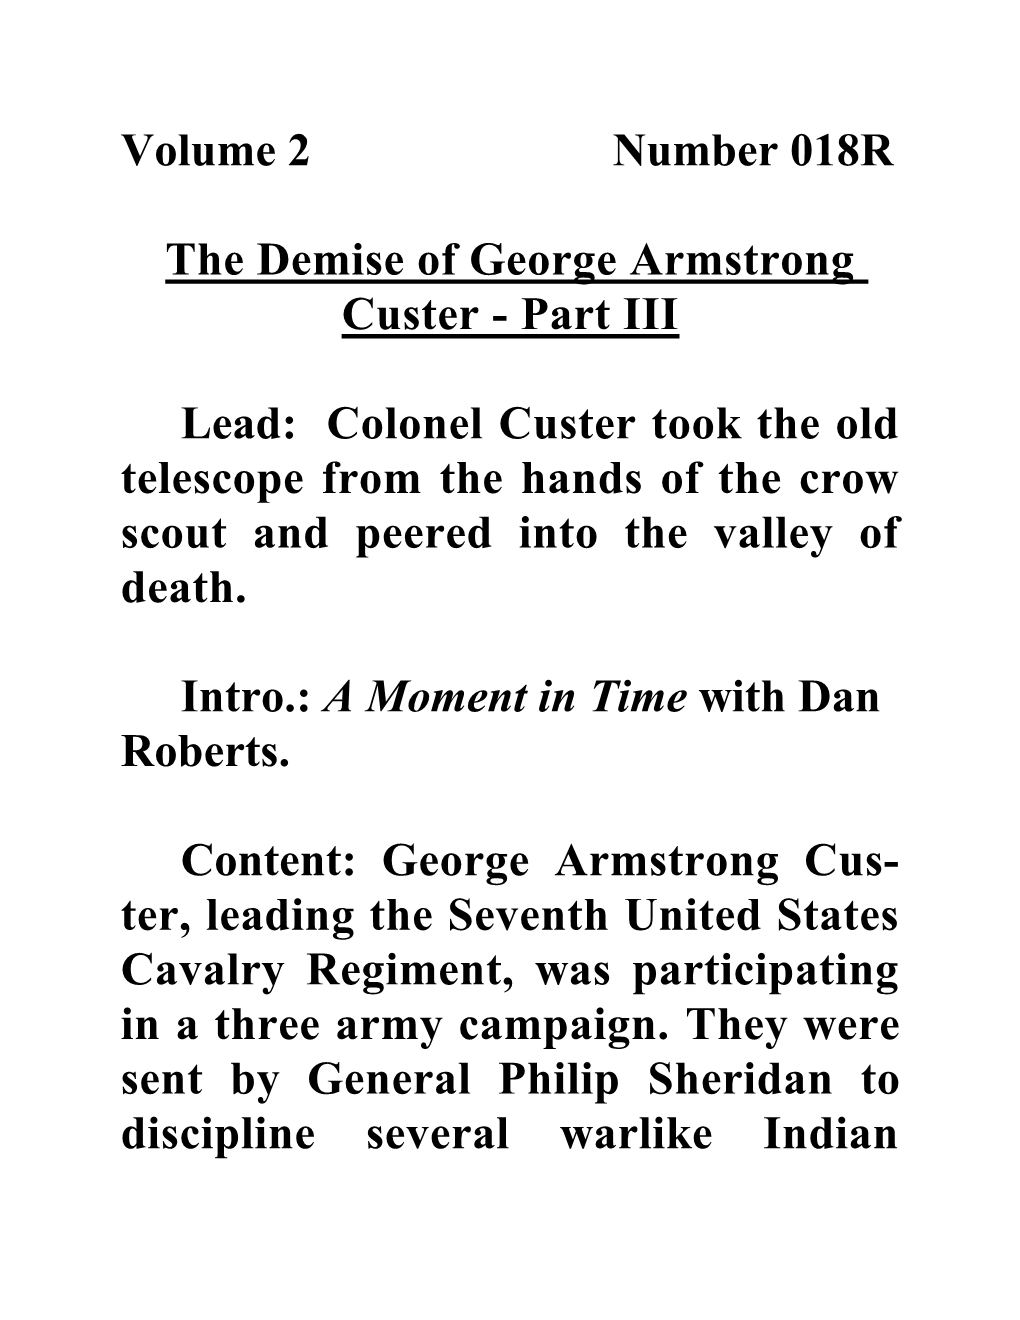 Volume 2 Number 018R the Demise of George Armstrong Custer